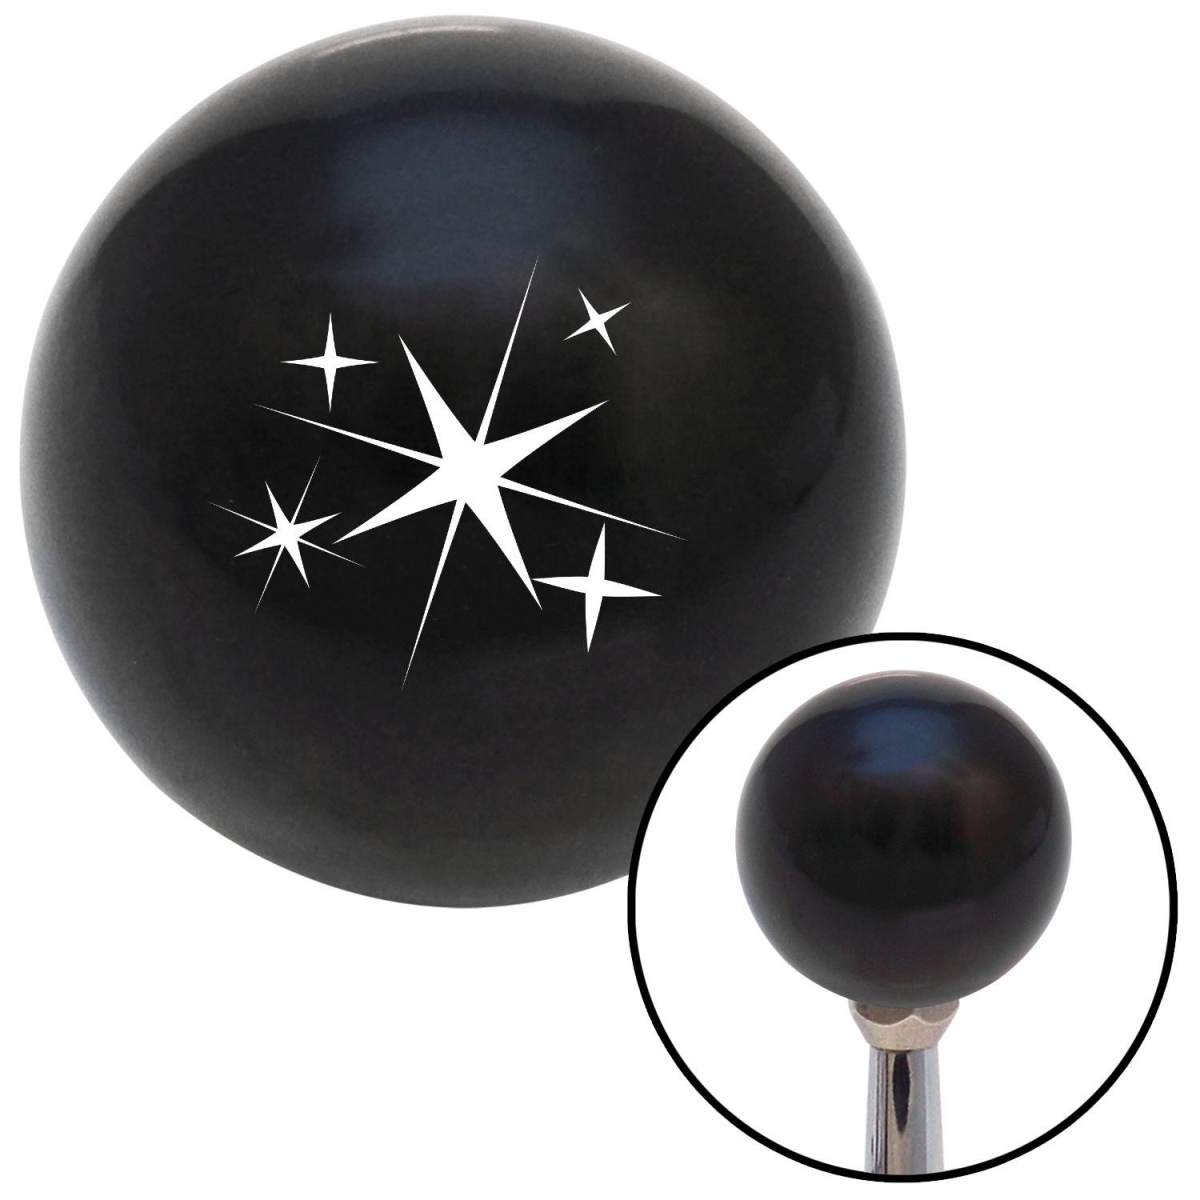 American Shifter 109744 White Abstract Stars Black Shift Knob with M16 x 1.5 Insert Shifter Auto Manual -  American Shifter Company